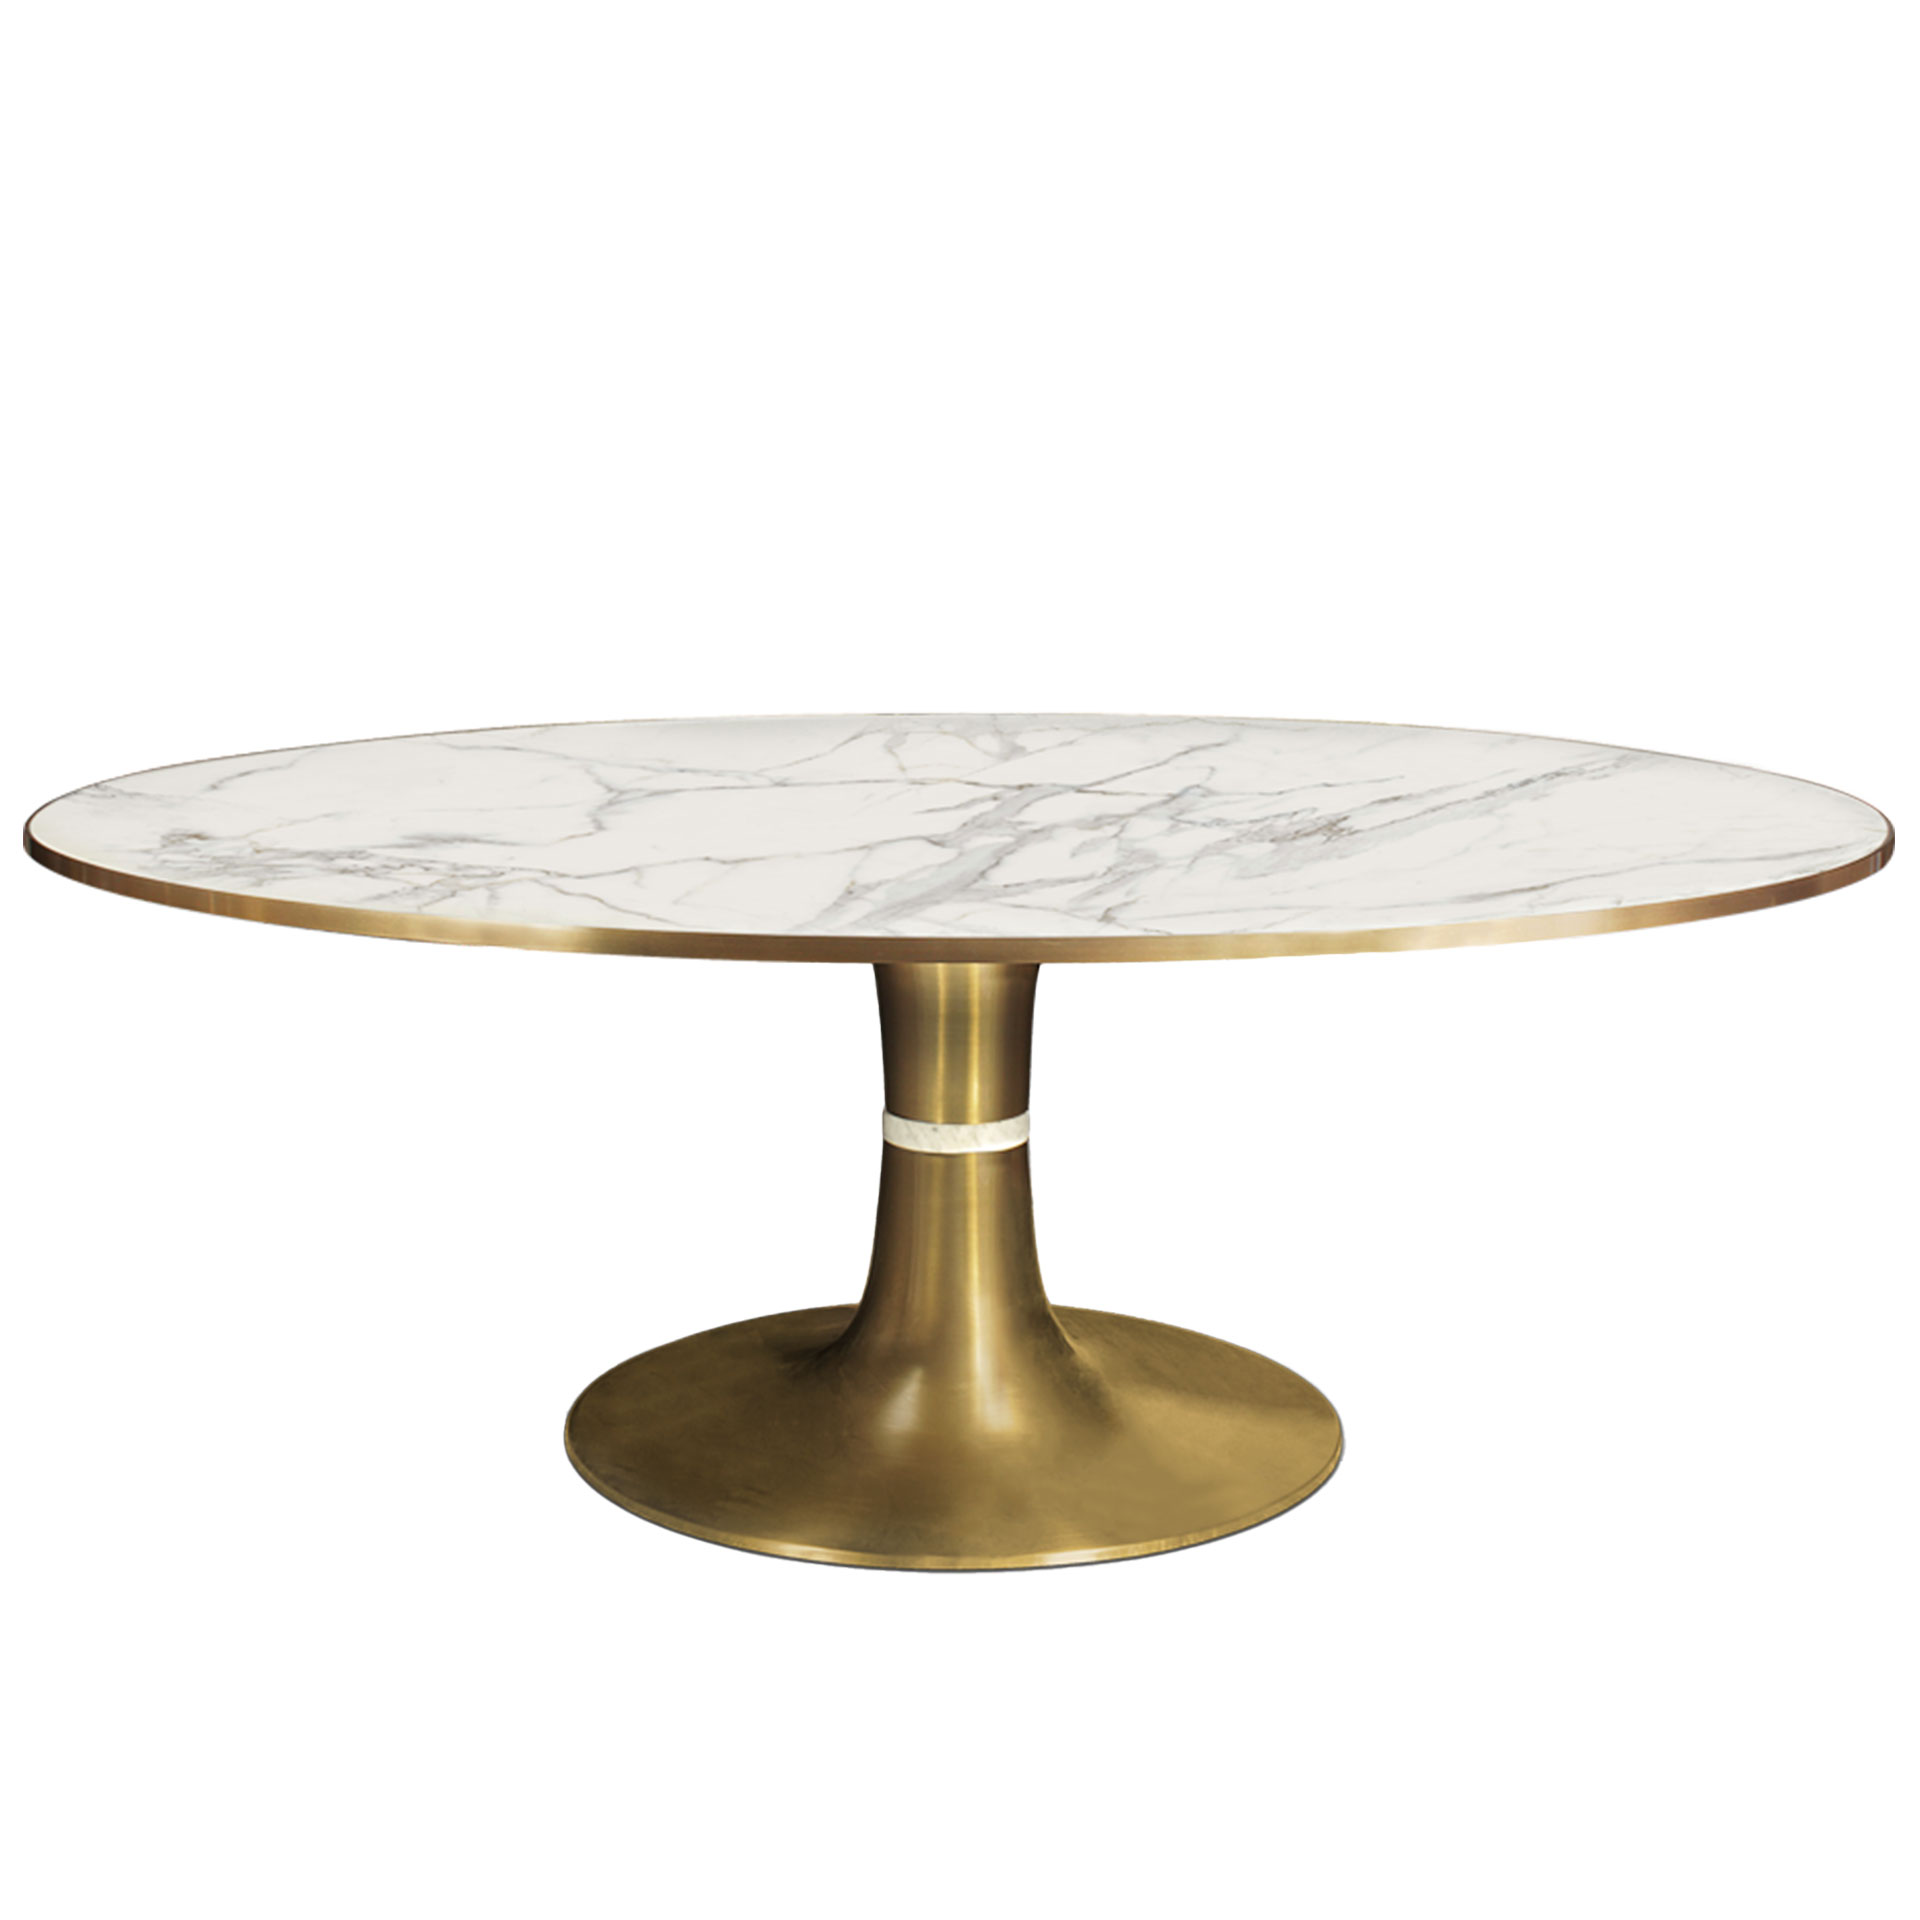 Caddo dining table